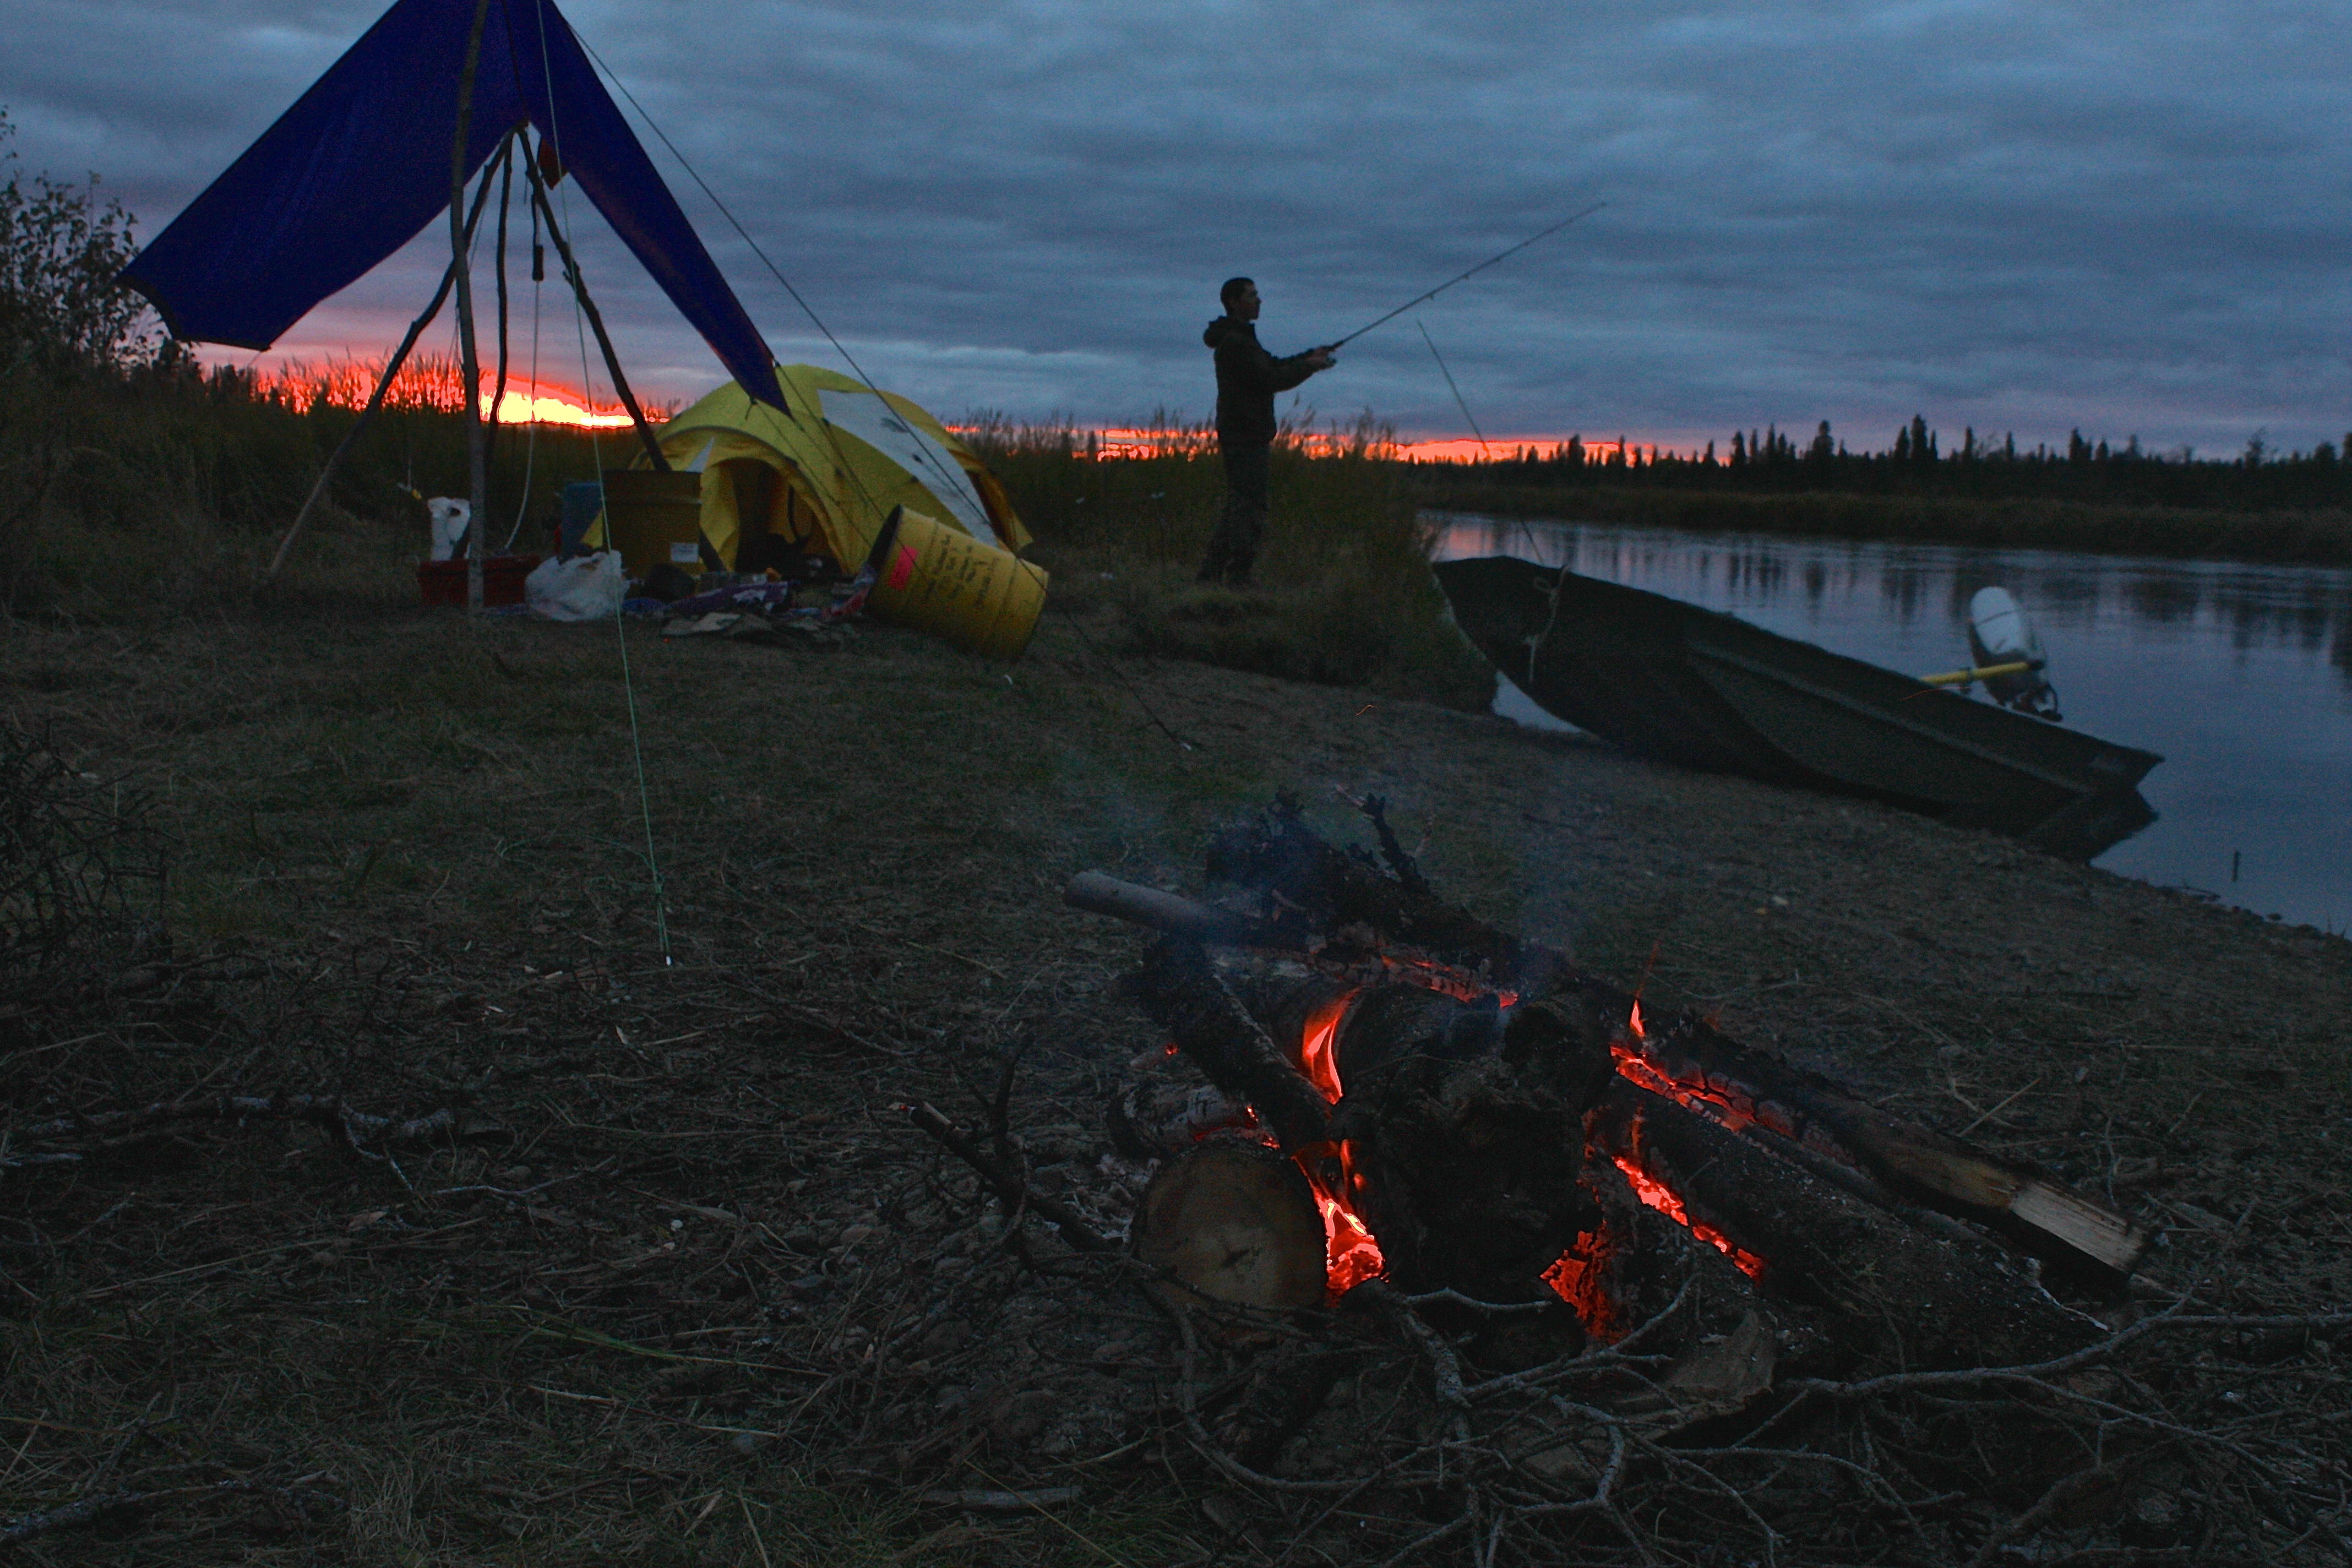 A man at a campsite fishing with fire, boat and tent in scene